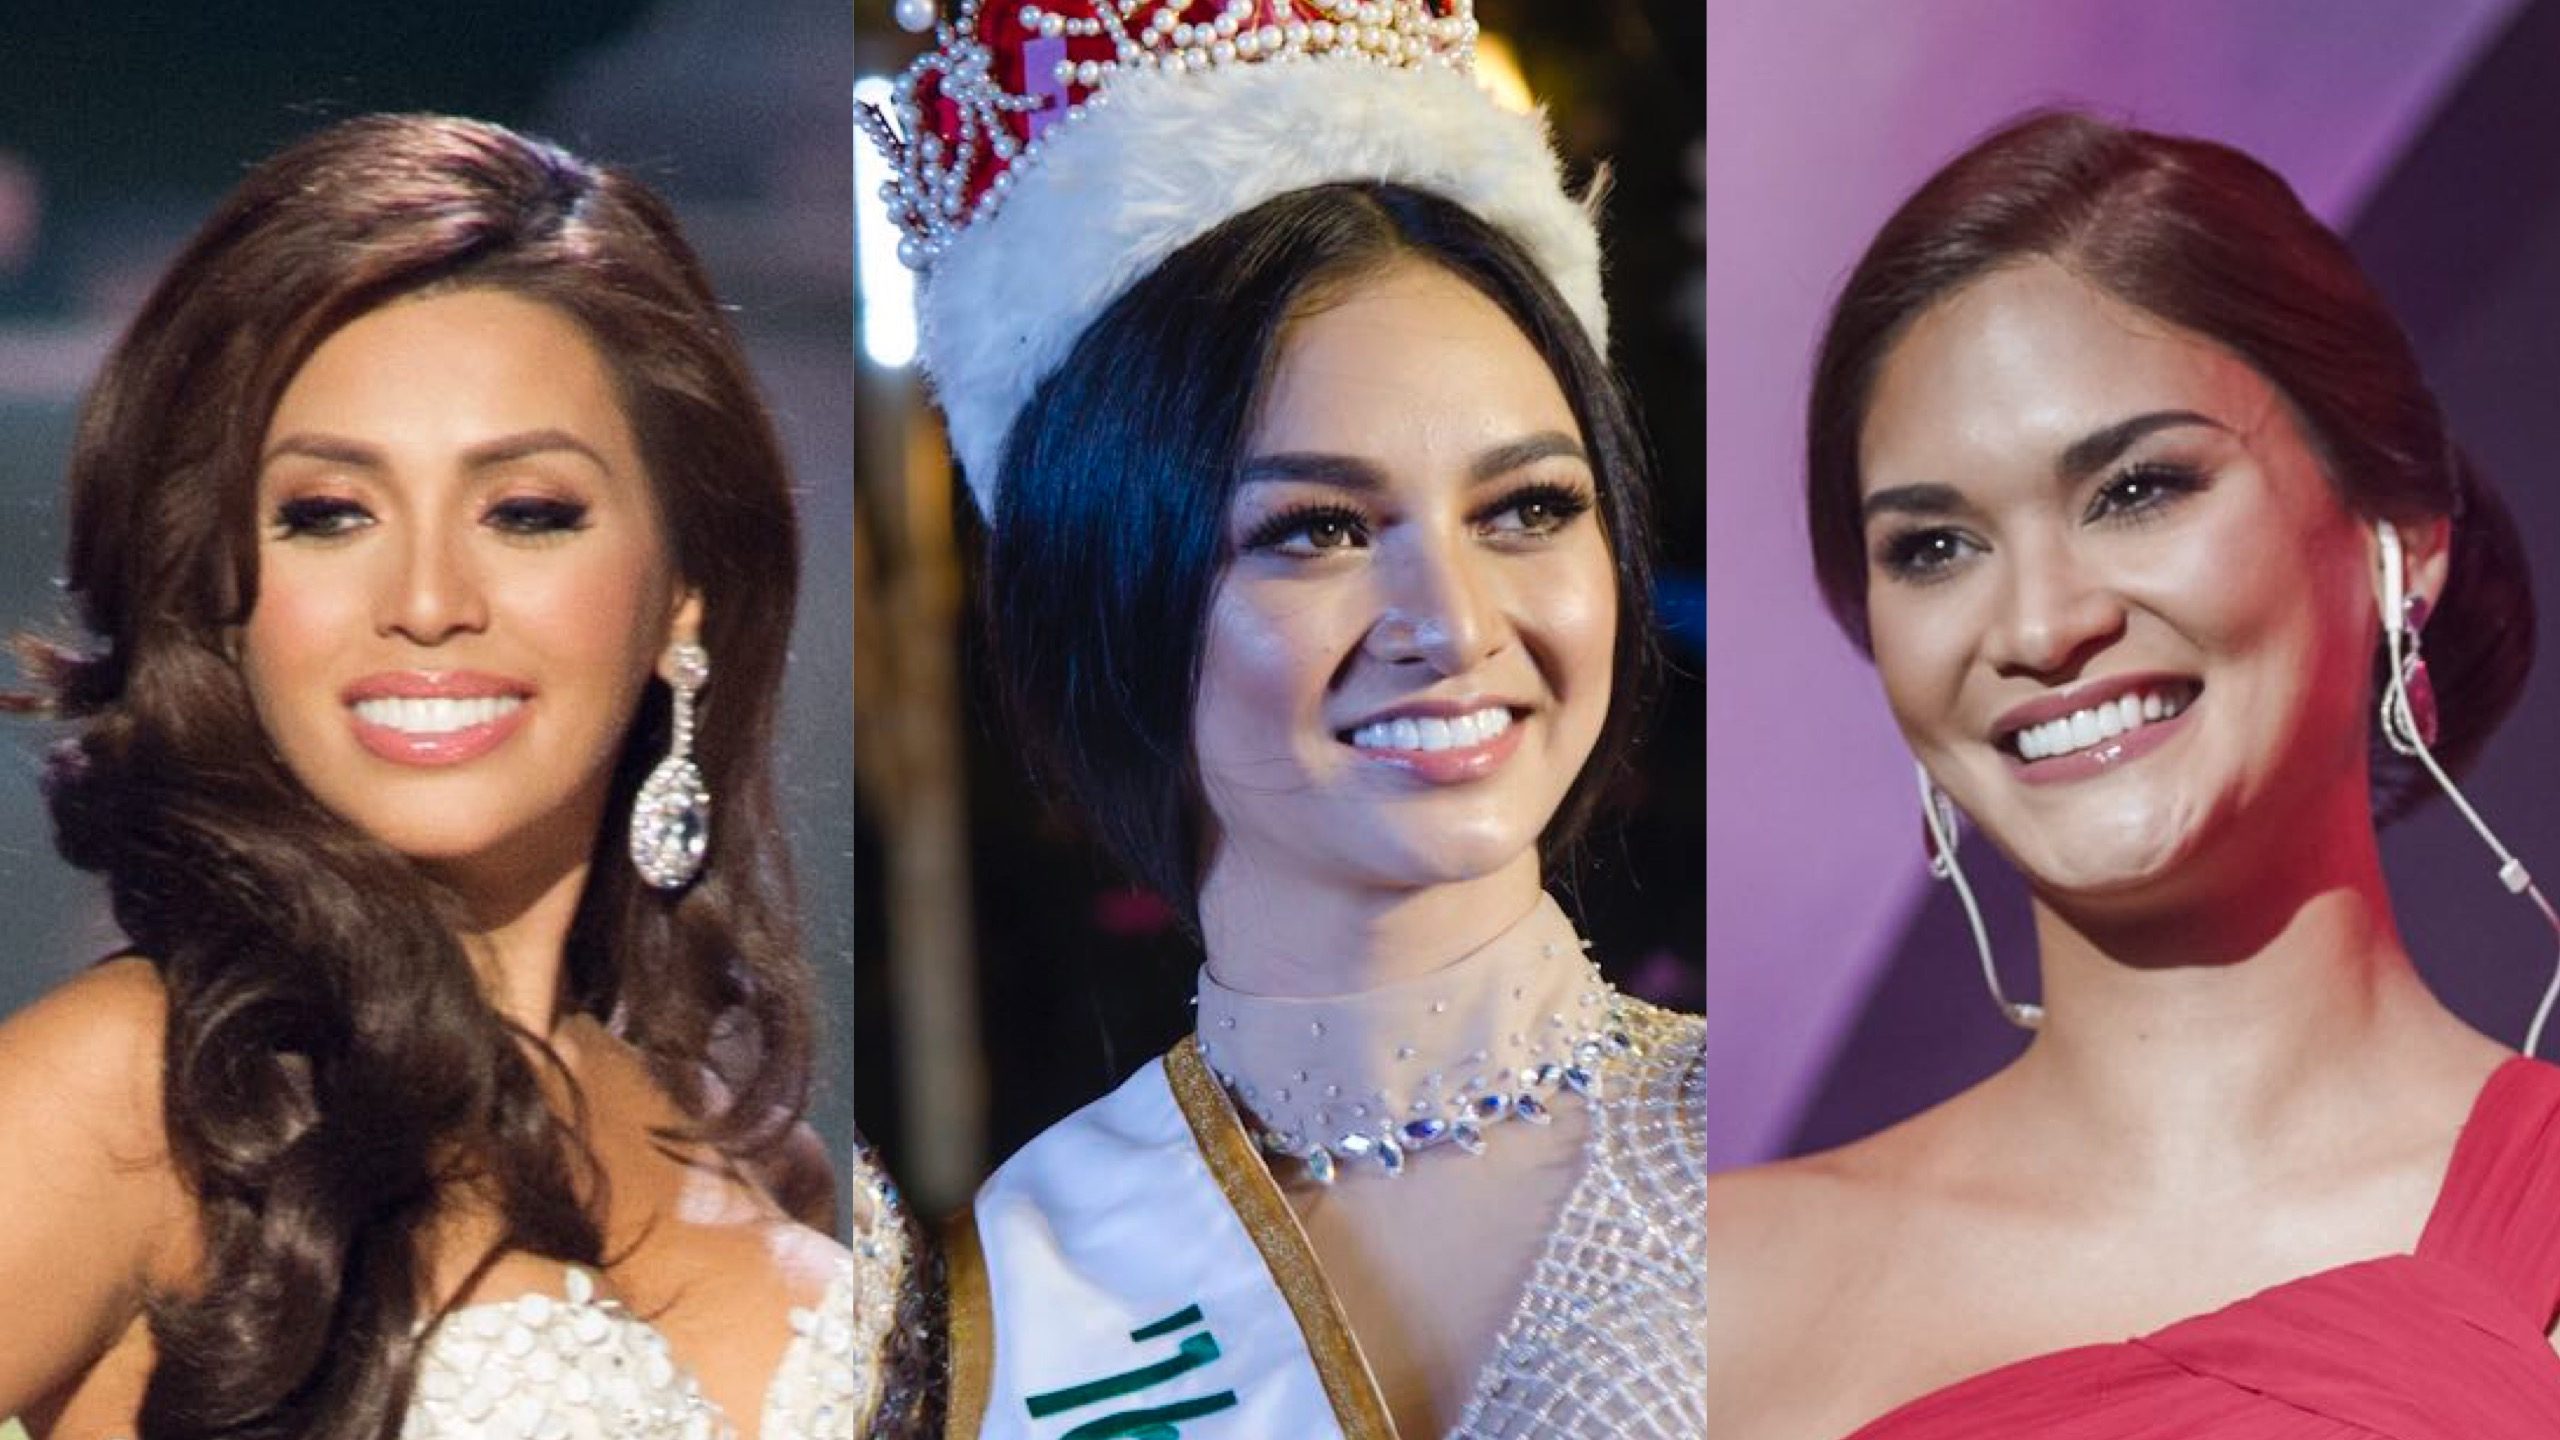 Winning a beauty pageant: does age matter?